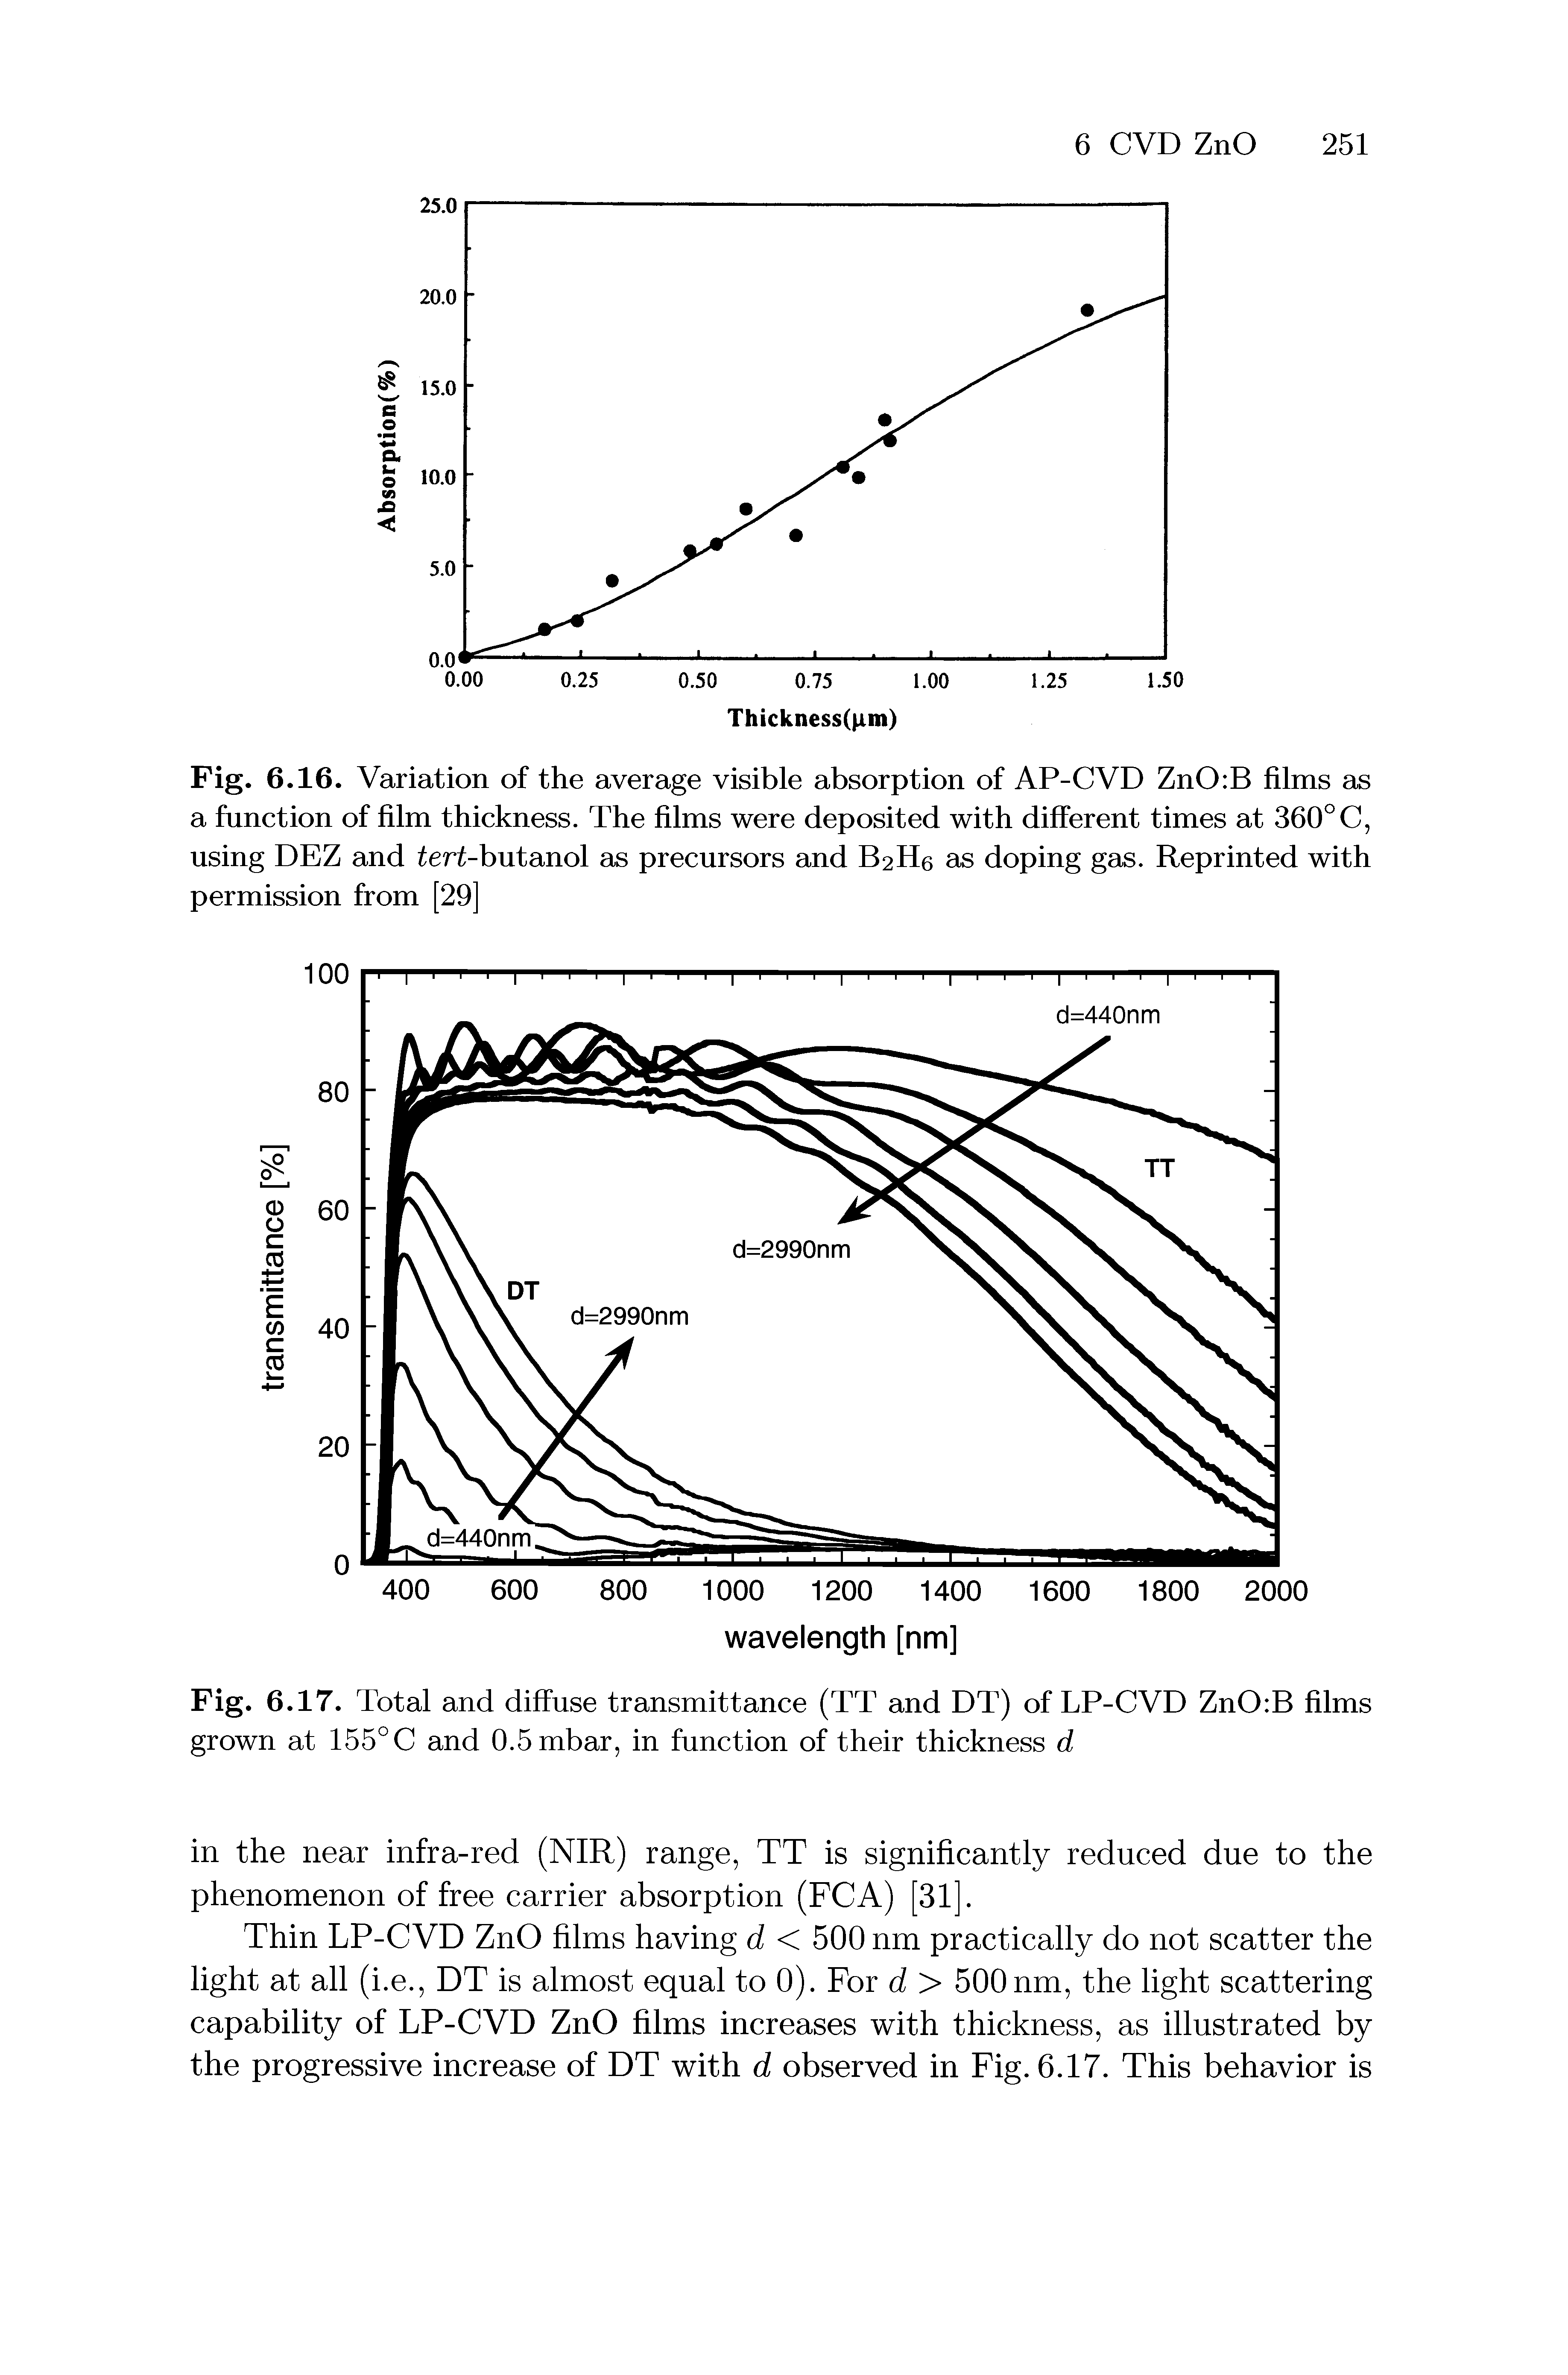 Fig. 6.16. Variation of the average visible absorption of AP-CVD ZnO B films as a function of film thickness. The films were deposited with different times at 360° C, using DEZ and ter -butanol as precursors and B2H6 as doping gas. Reprinted with permission from [29]...